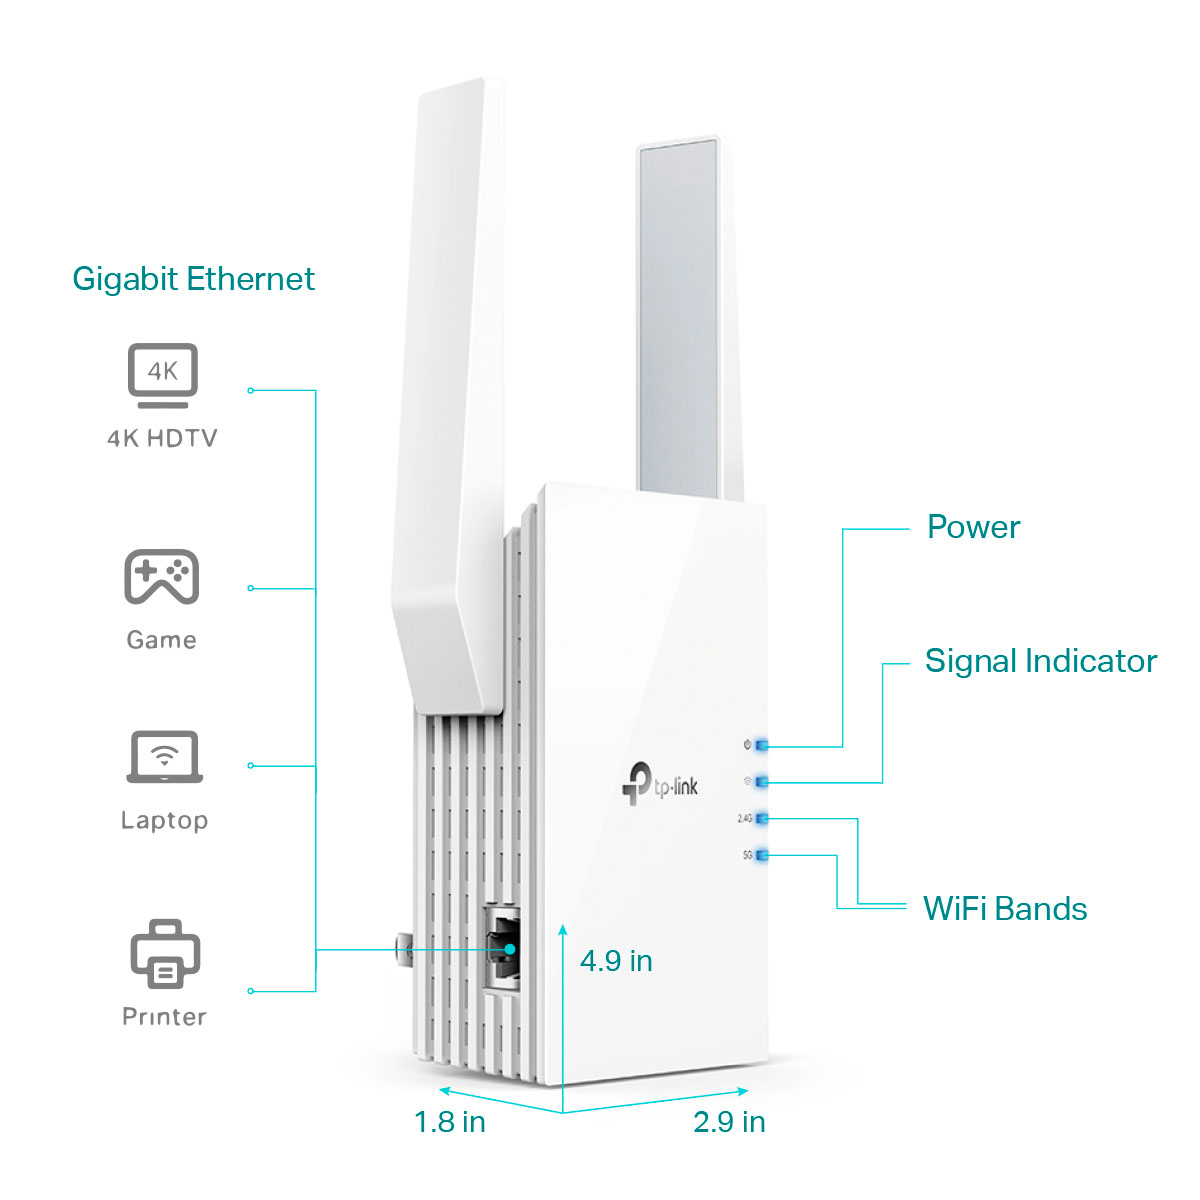 TP-Link : AX1500 WI-FI 6 ROUTER 1201MBPS AT 5GHZ+300MBPS AT 2.4G